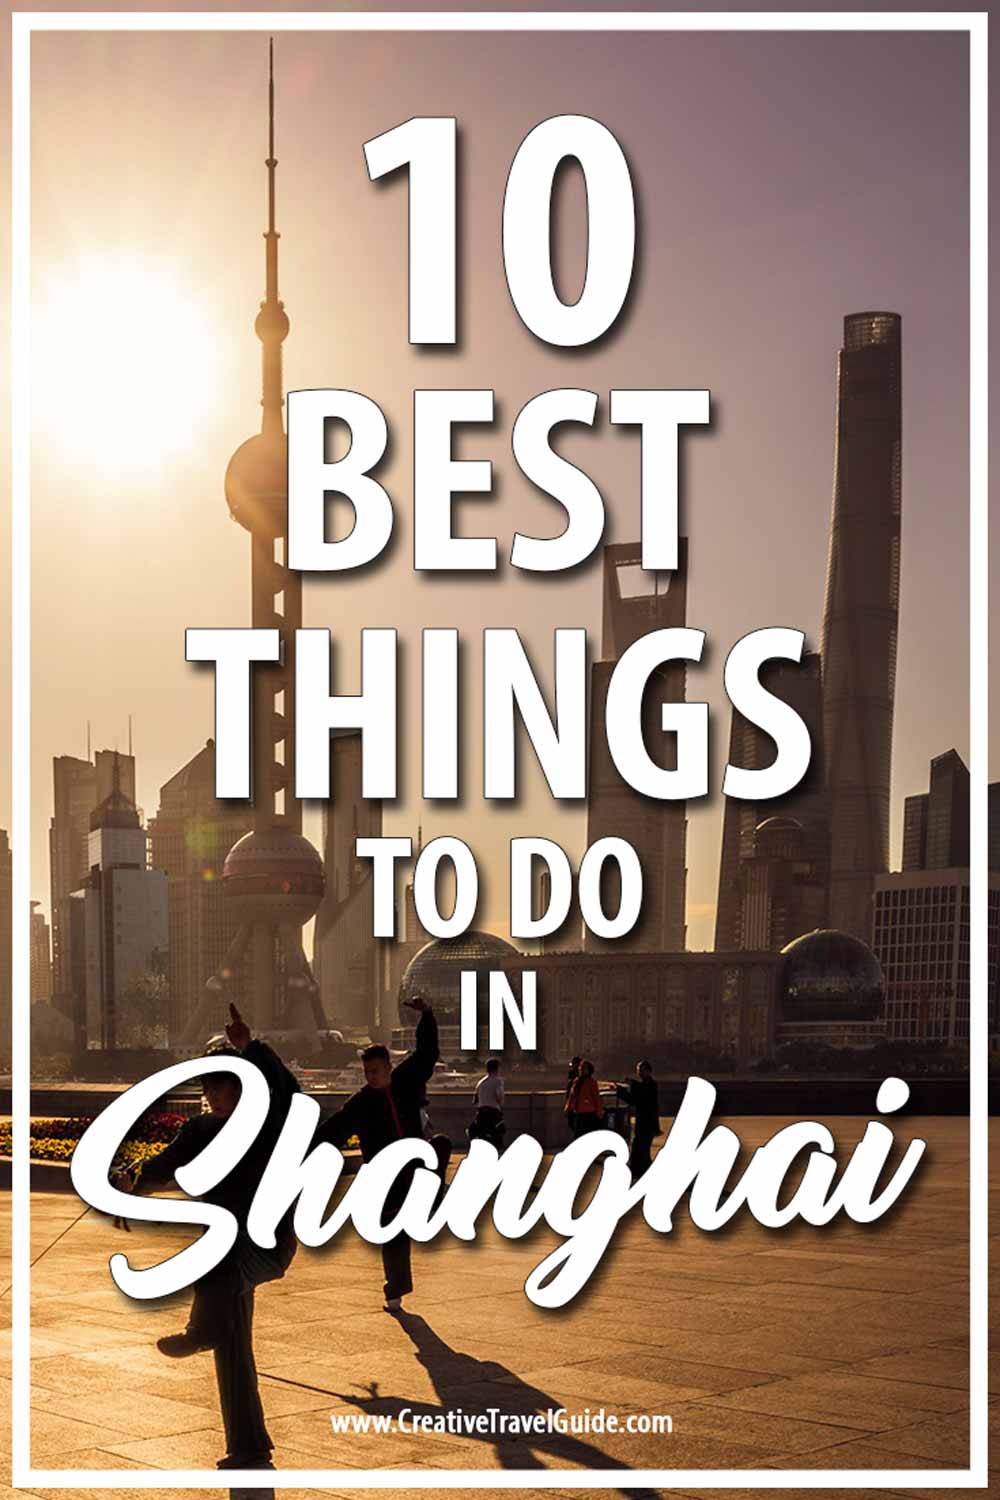 10 best things to do in Shanghai